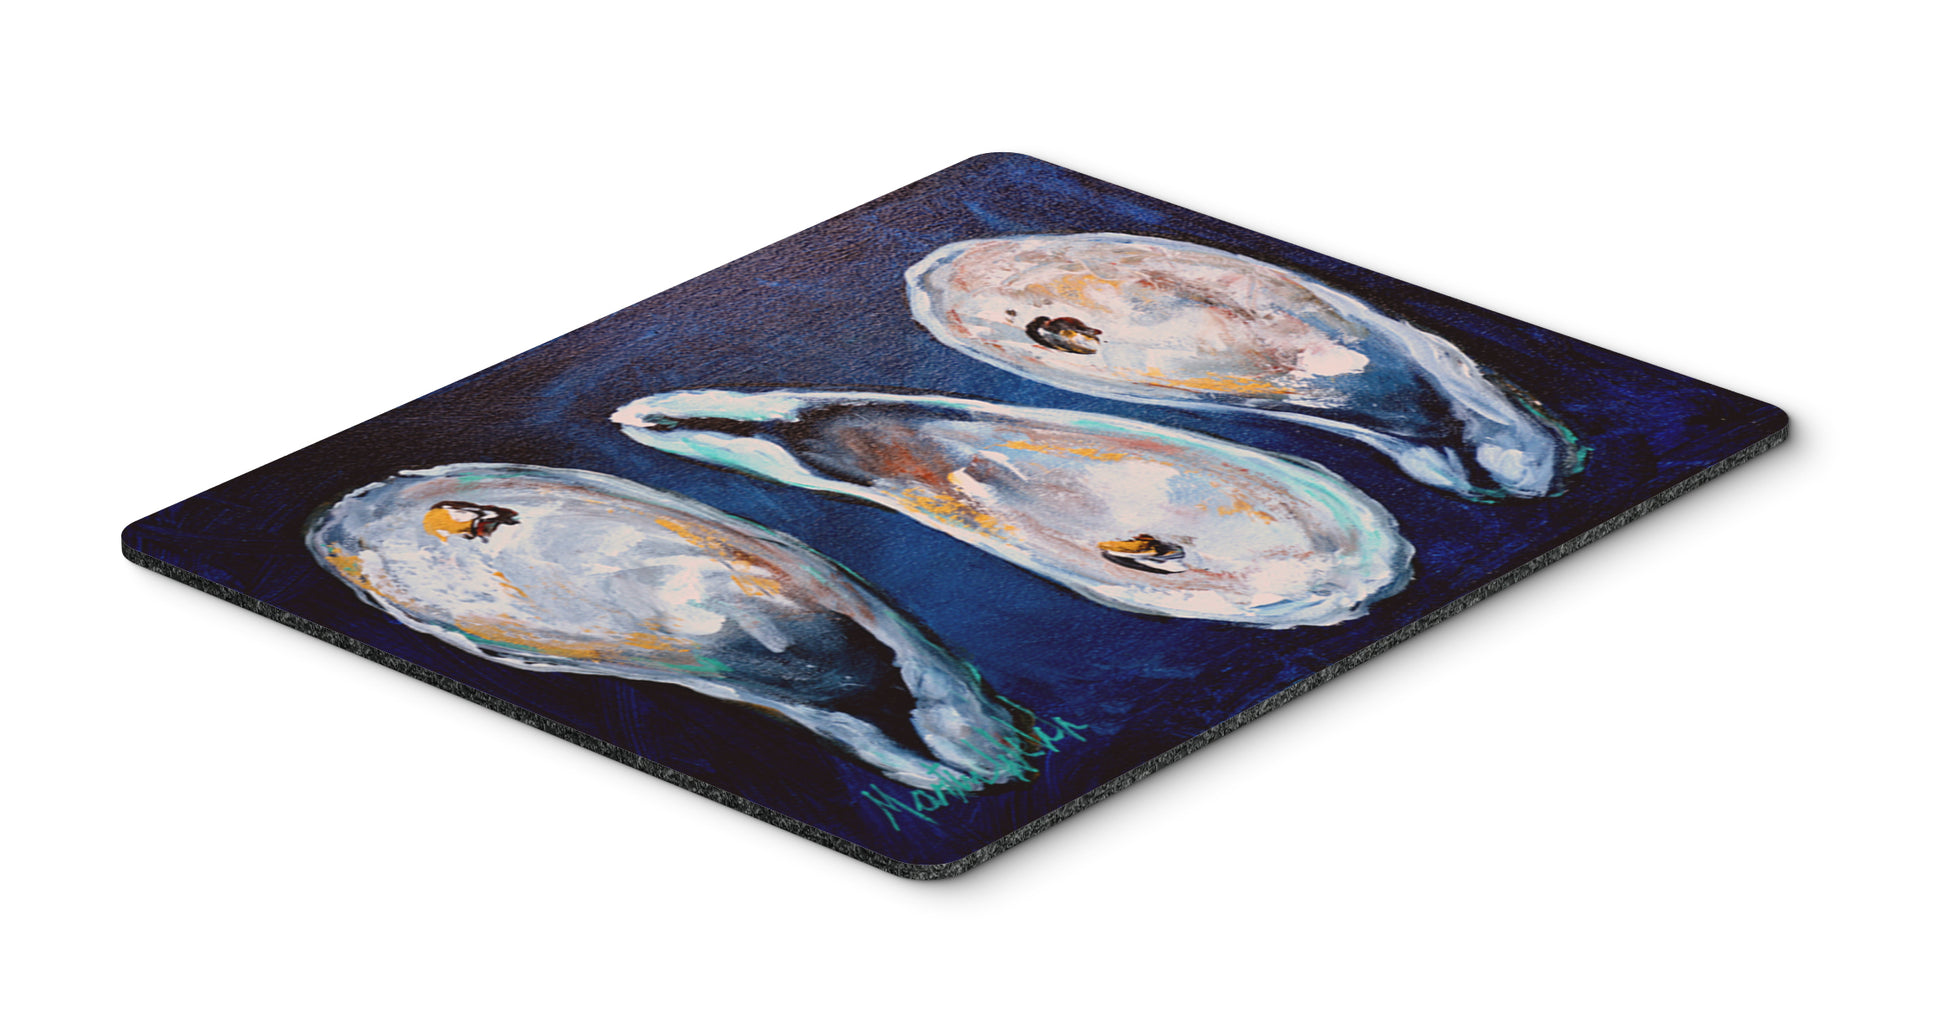 Buy this Oysters Give Me More Mouse Pad, Hot Pad or Trivet